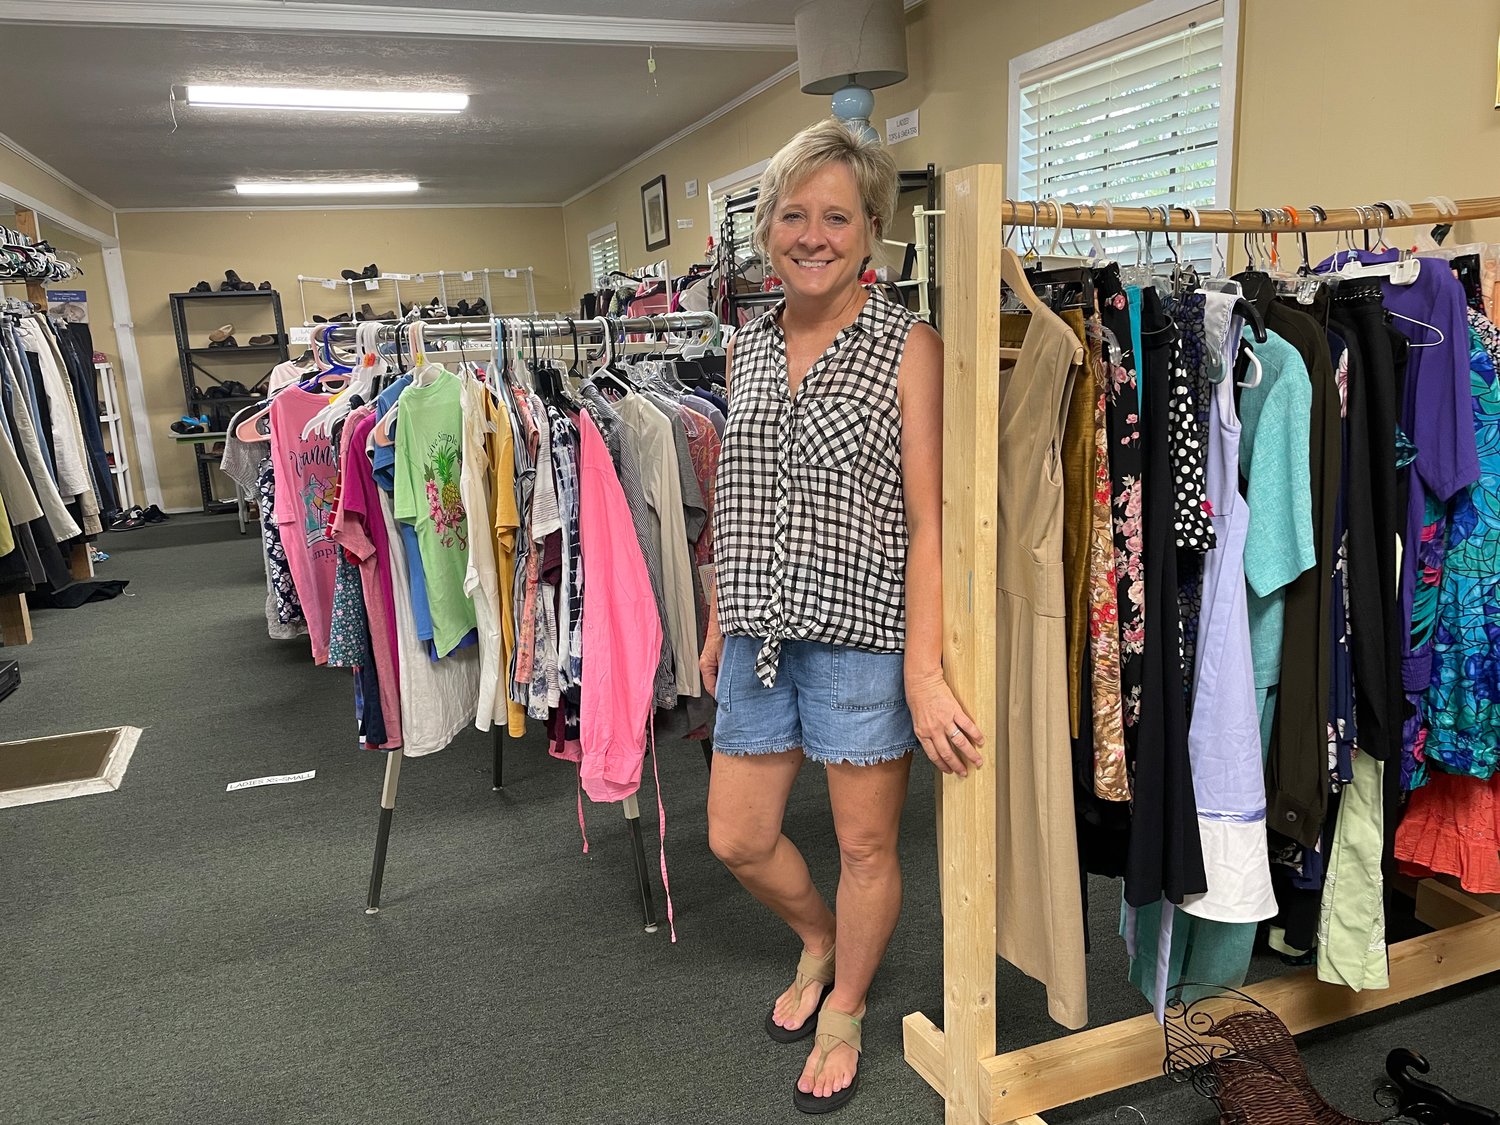 Volunteer Christy Street in front of rows of clothes at the Resource Center located at Trace Ridge Church. The center first opened in 2018 and continues to grow each year. To date, the center has given away over 1,000 food packages, 200 beds, and around 200 sets of bedding to needy people in the community.